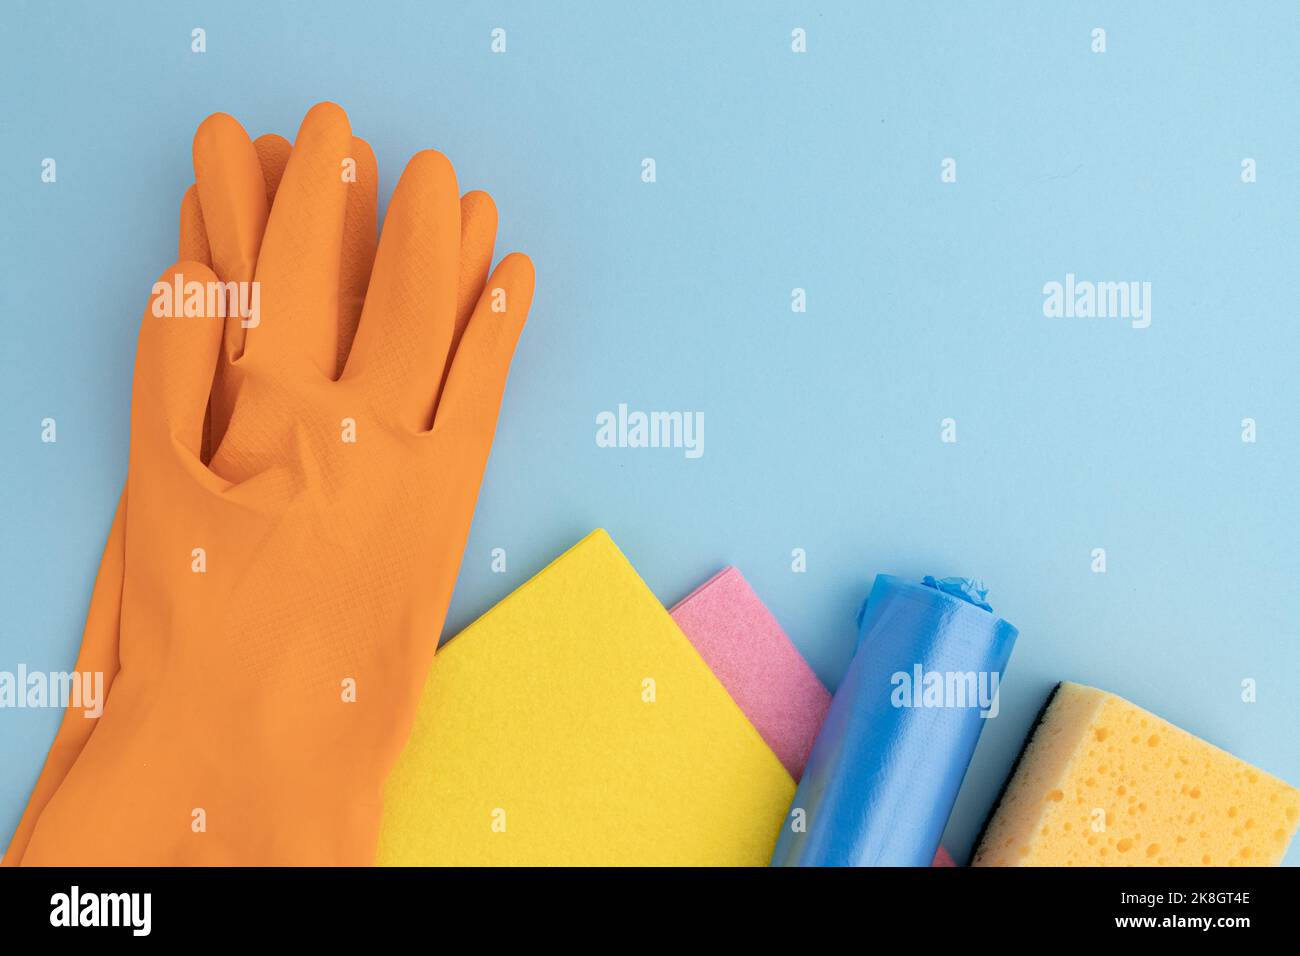 sponge for washing dishes, colored microfiber rags and rubber gloves, garbage bags laid out with frame on blue background, cleaning tools concept with Stock Photo